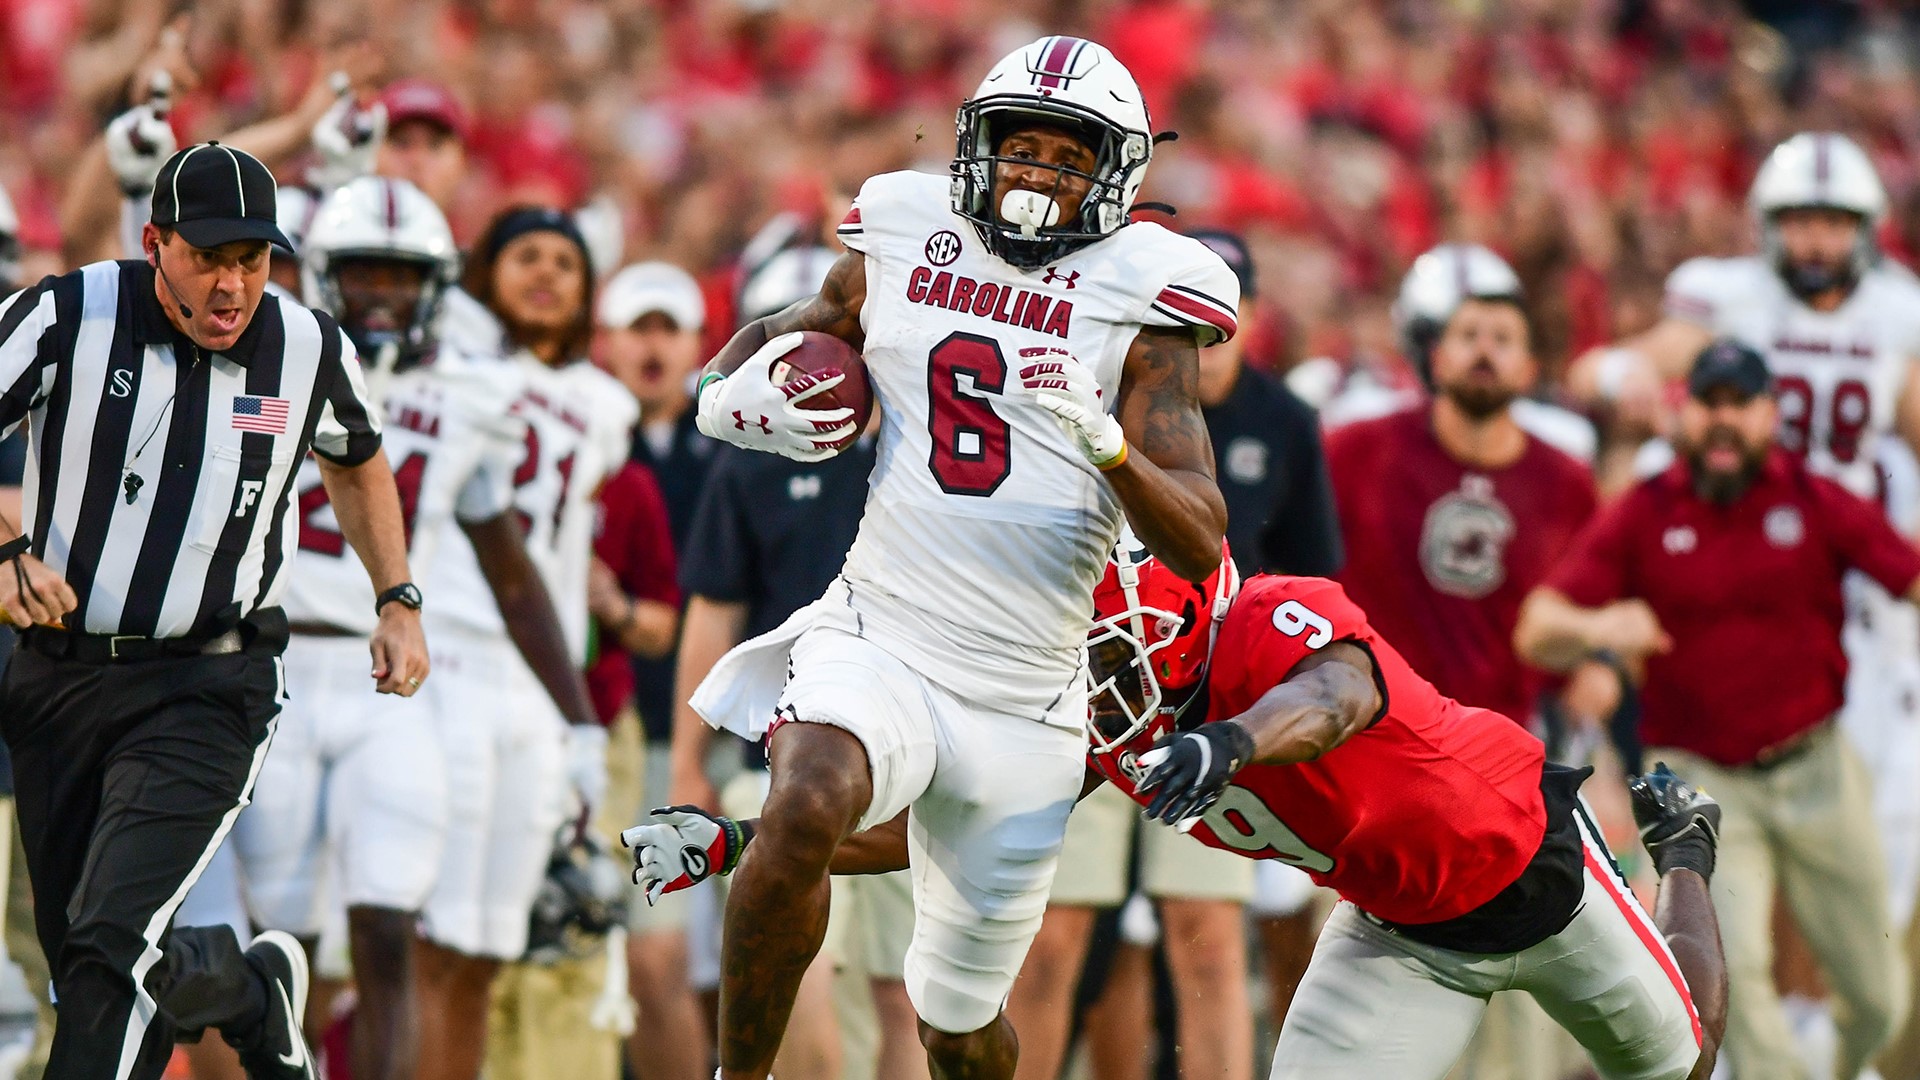 Josh Vann will return to Carolina for another season
The Gamecocks top receiver from 2021 will be back in the Garnet and Black in the fall.